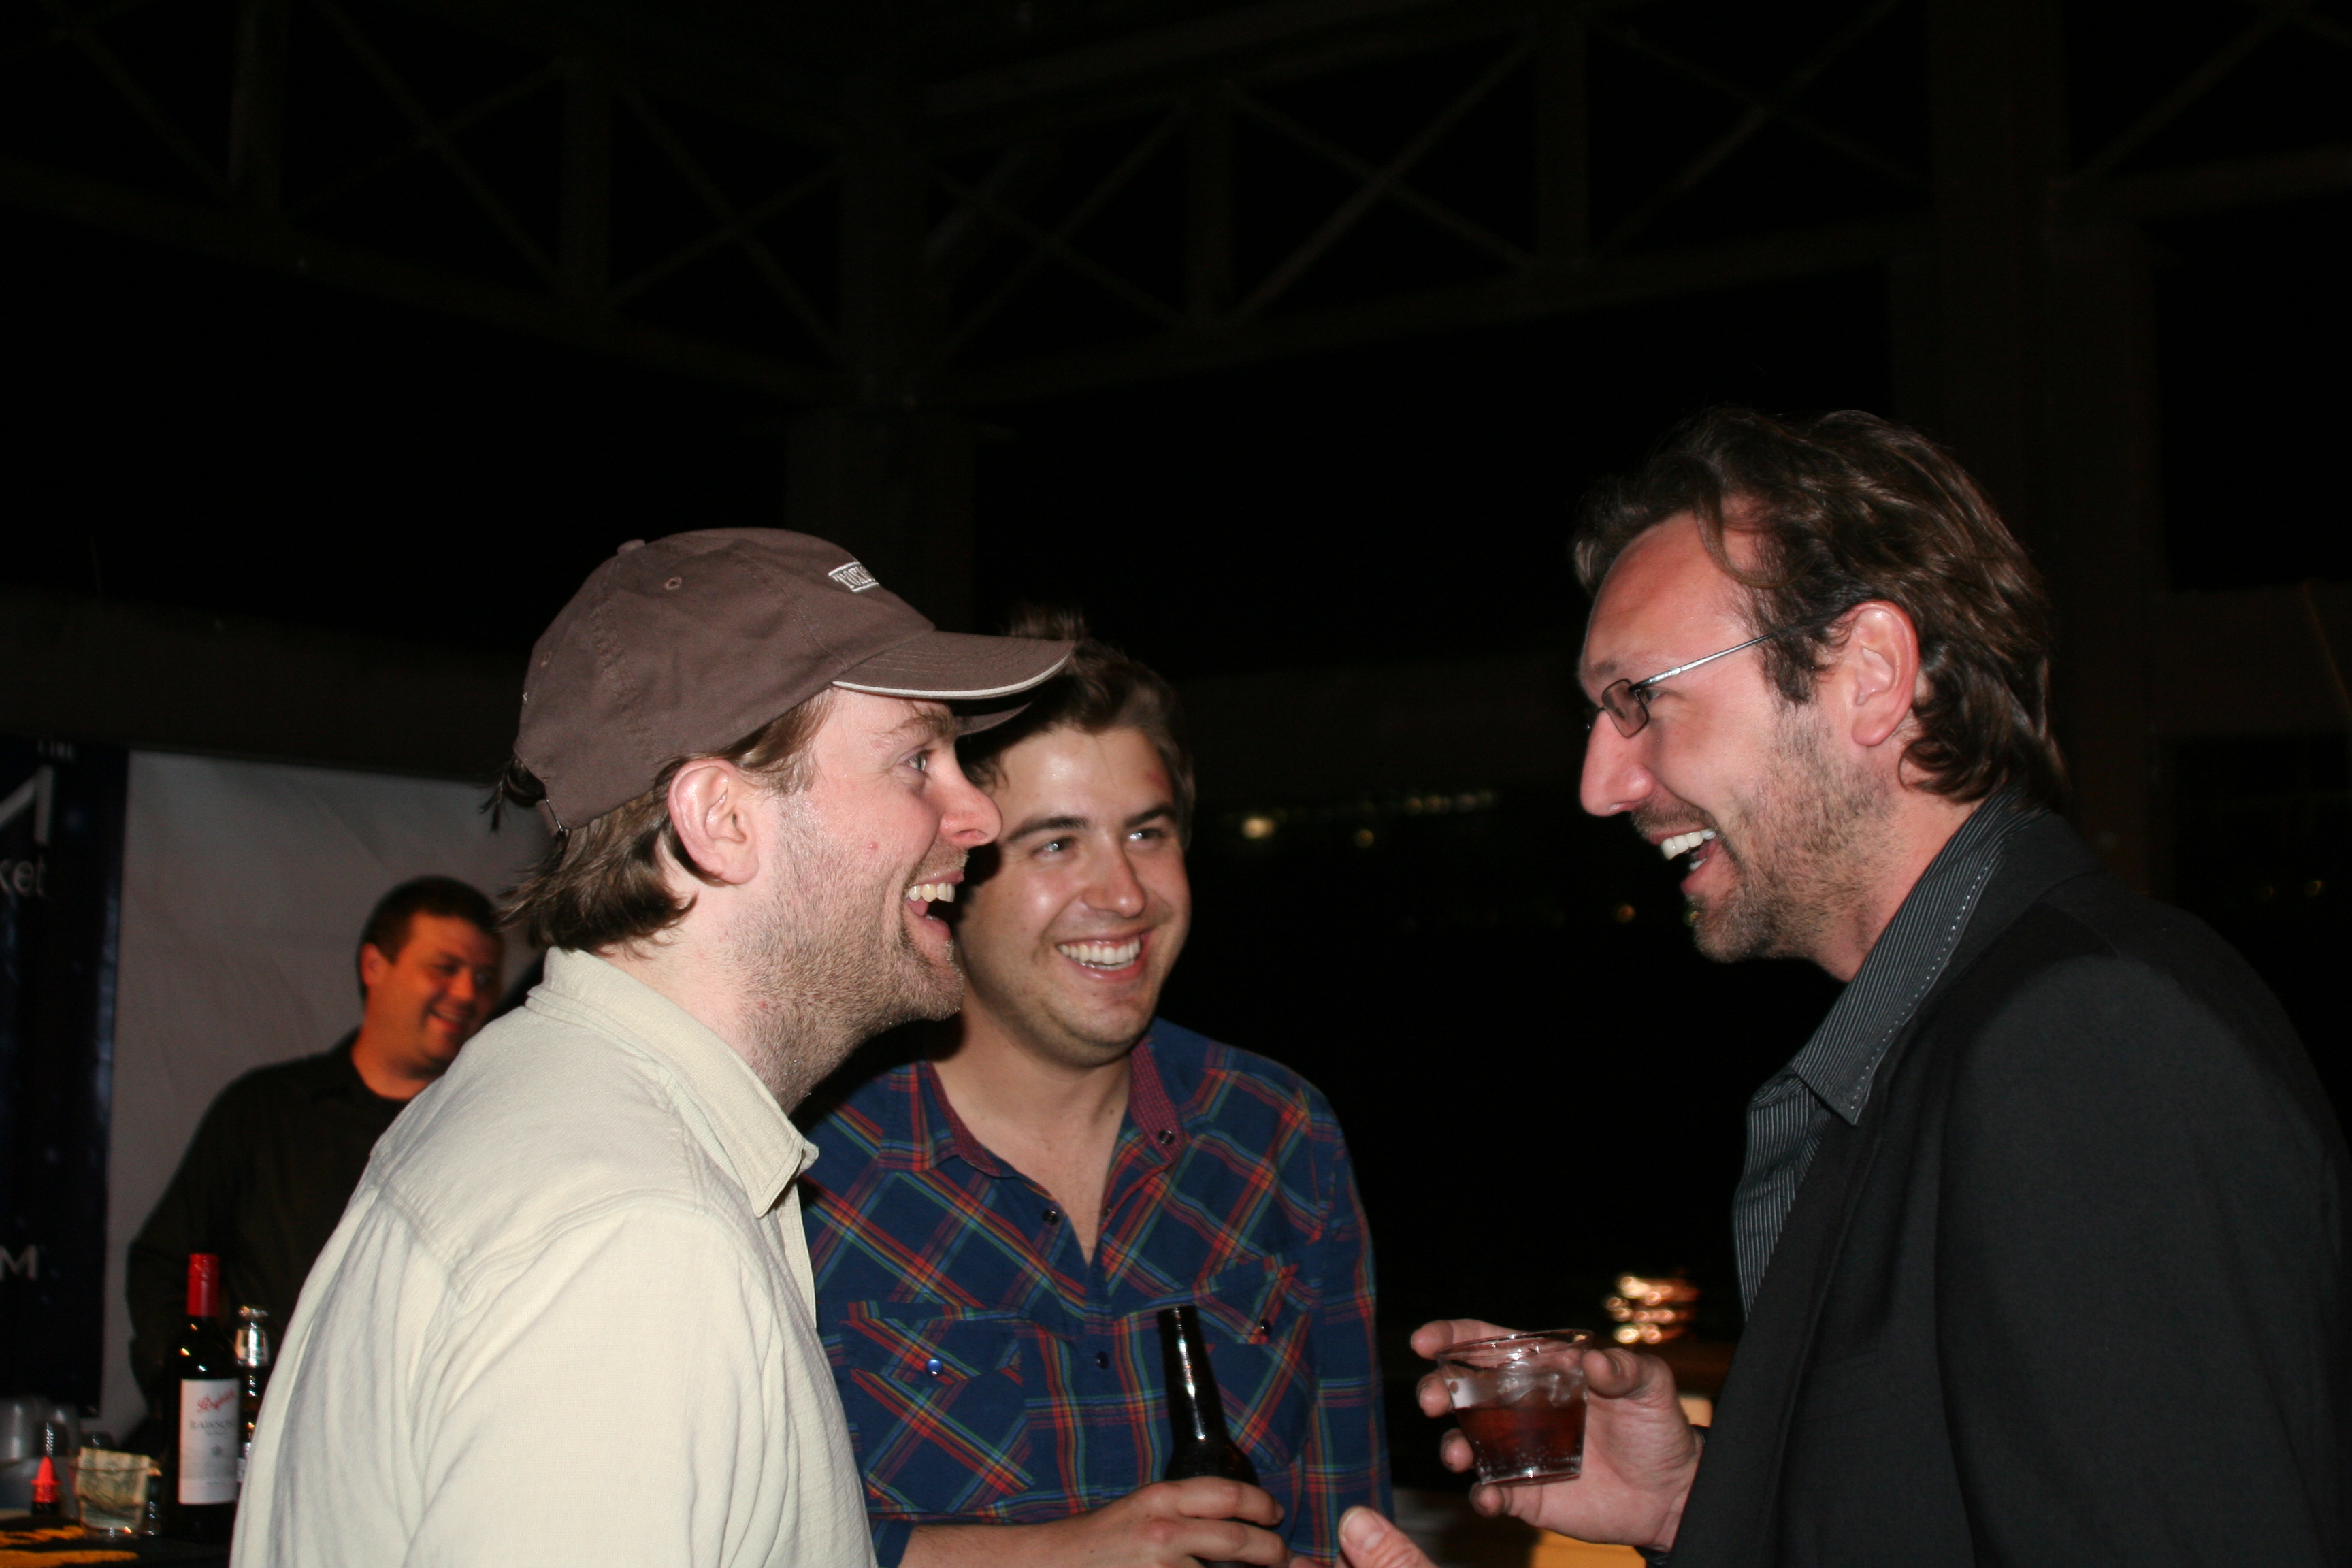 Wade Smith talks with Producer PG Banker and director Andrew Fuller at 2010 Nashville Film Com event.